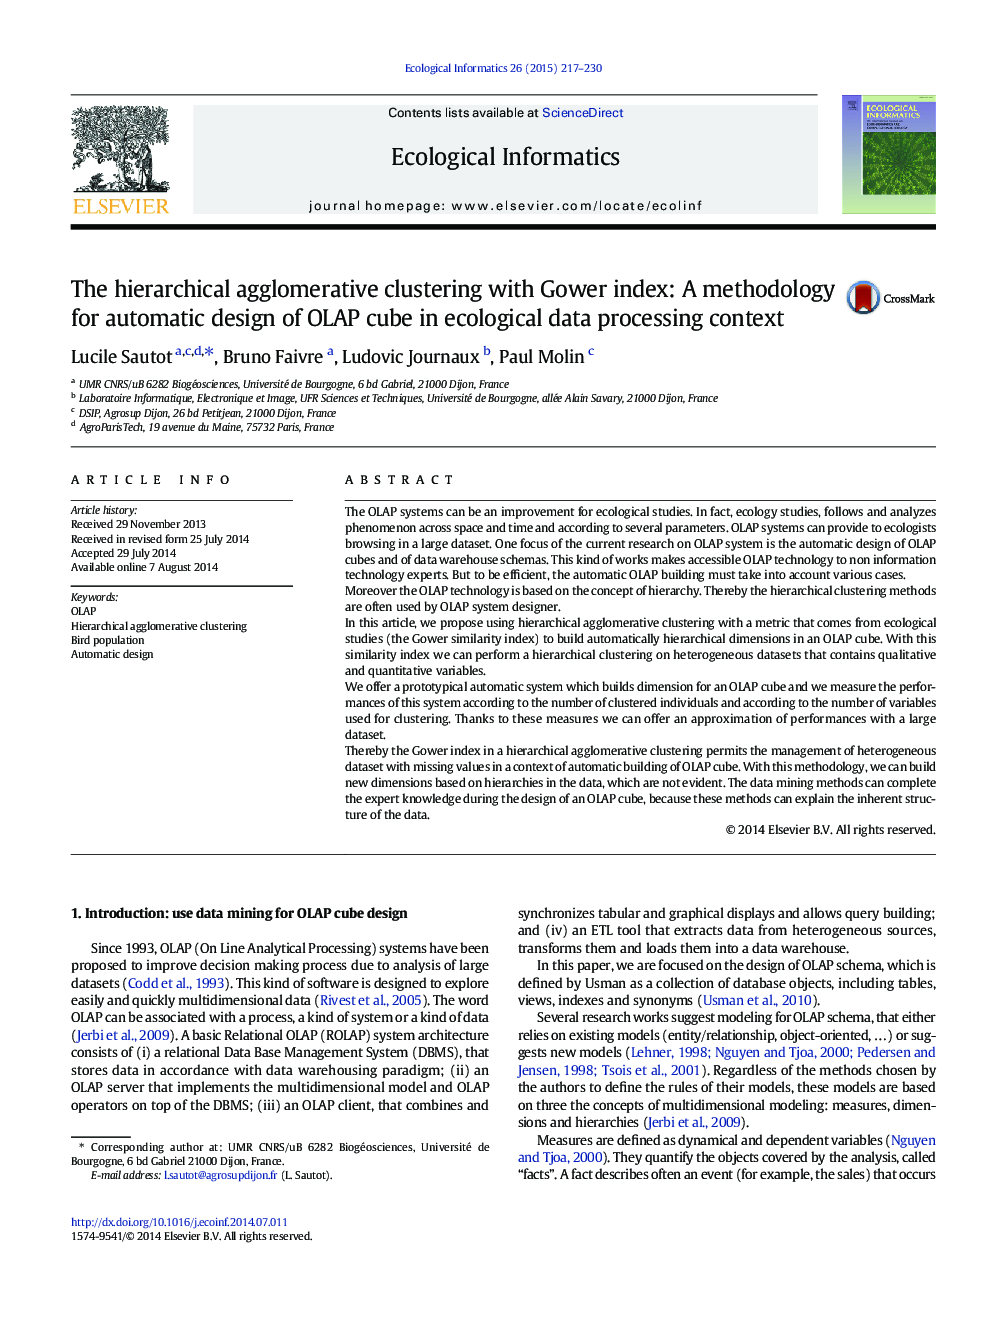 The hierarchical agglomerative clustering with Gower index: A methodology for automatic design of OLAP cube in ecological data processing context